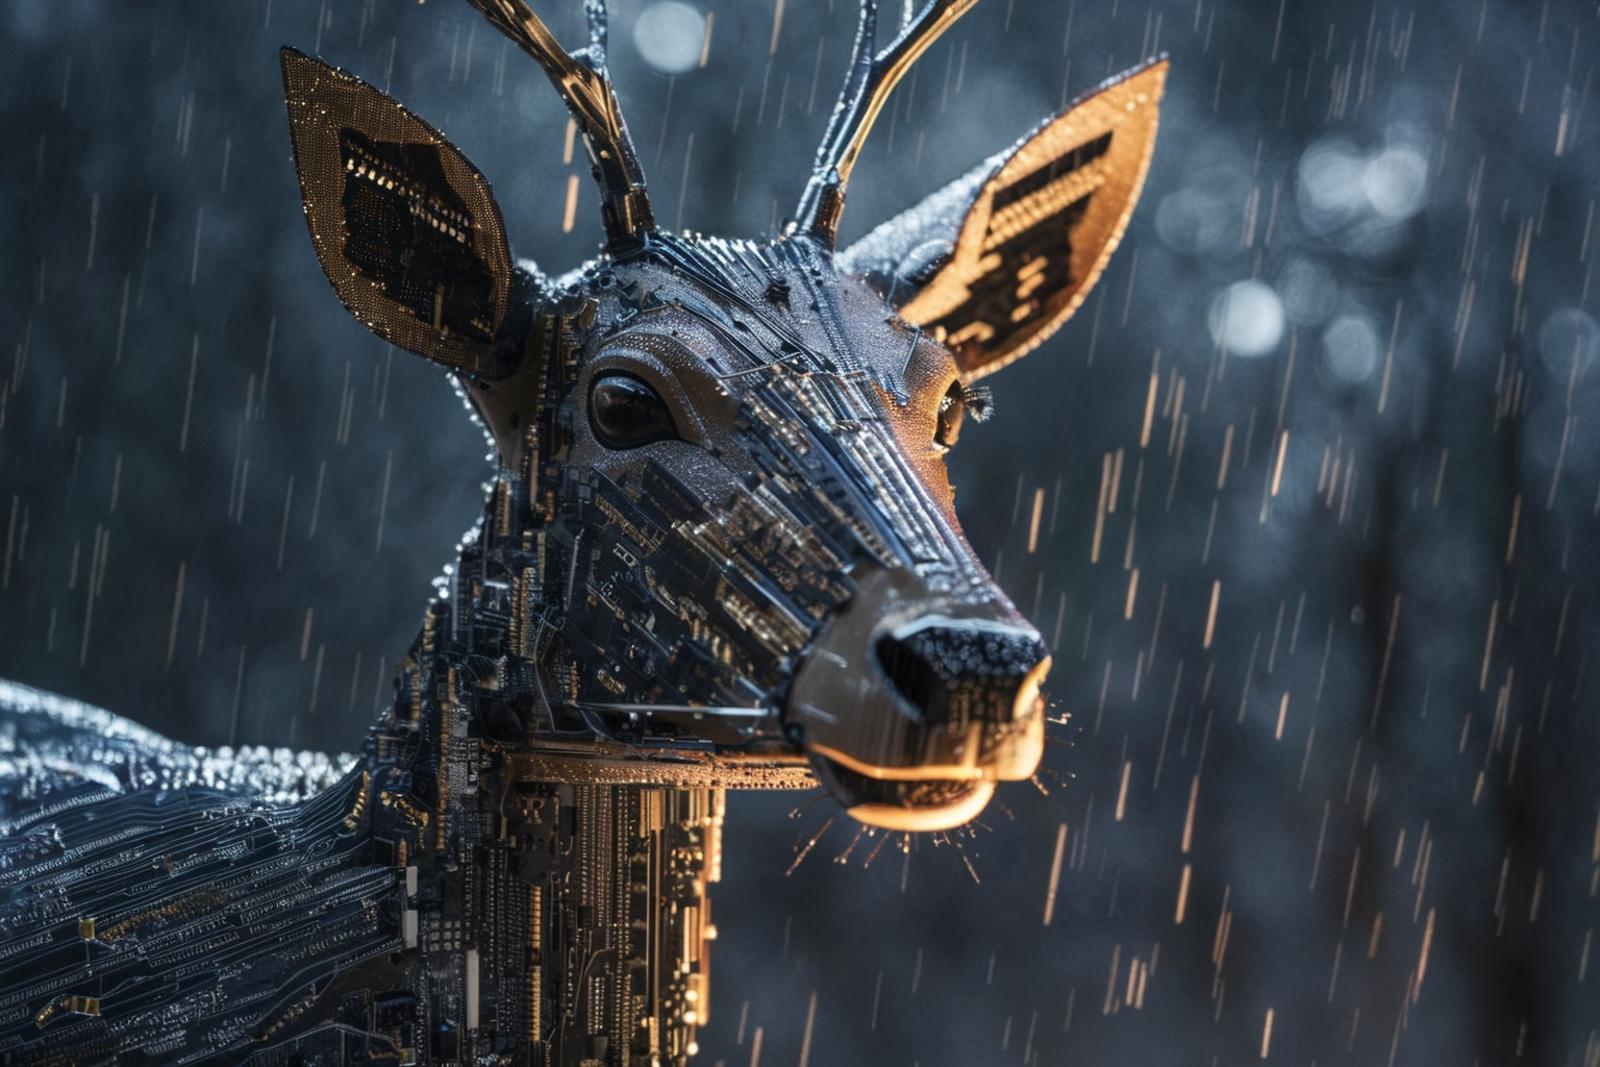 A deer sculpture made from wires and metal, standing in the rain.